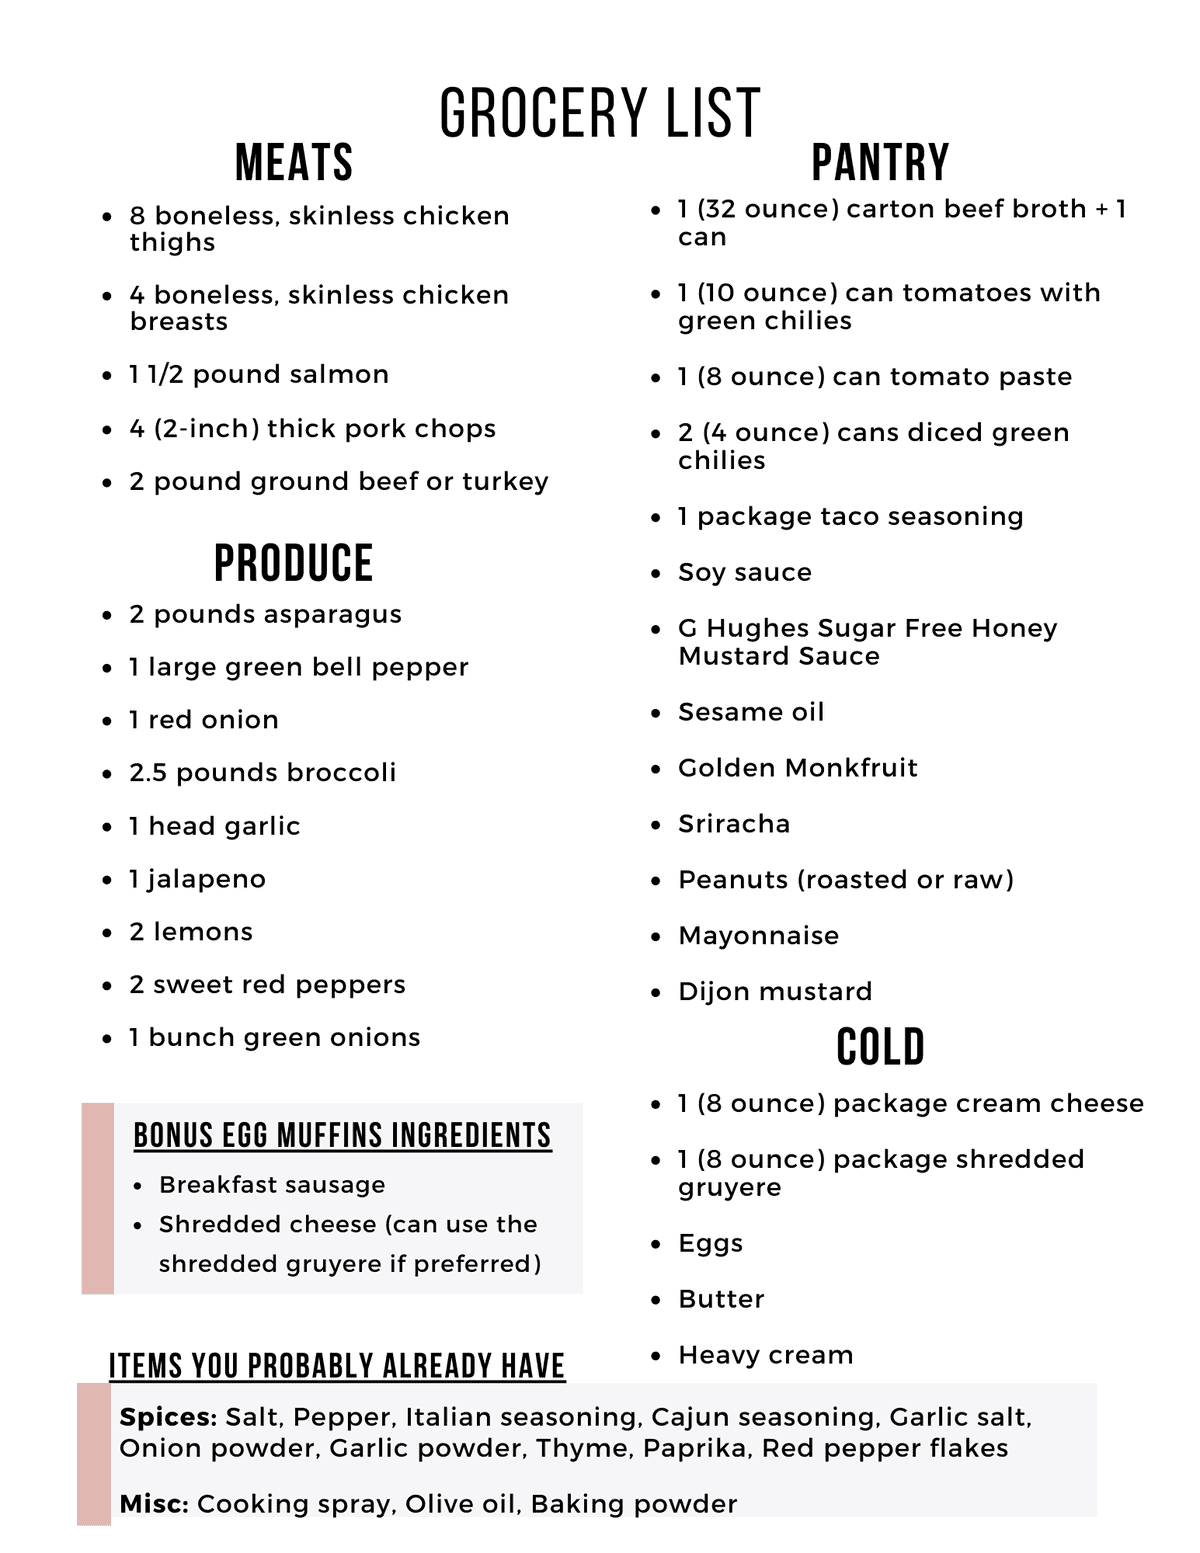 This keto grocery list is everything you need for a full week of delicious kid friendly keto dinners!